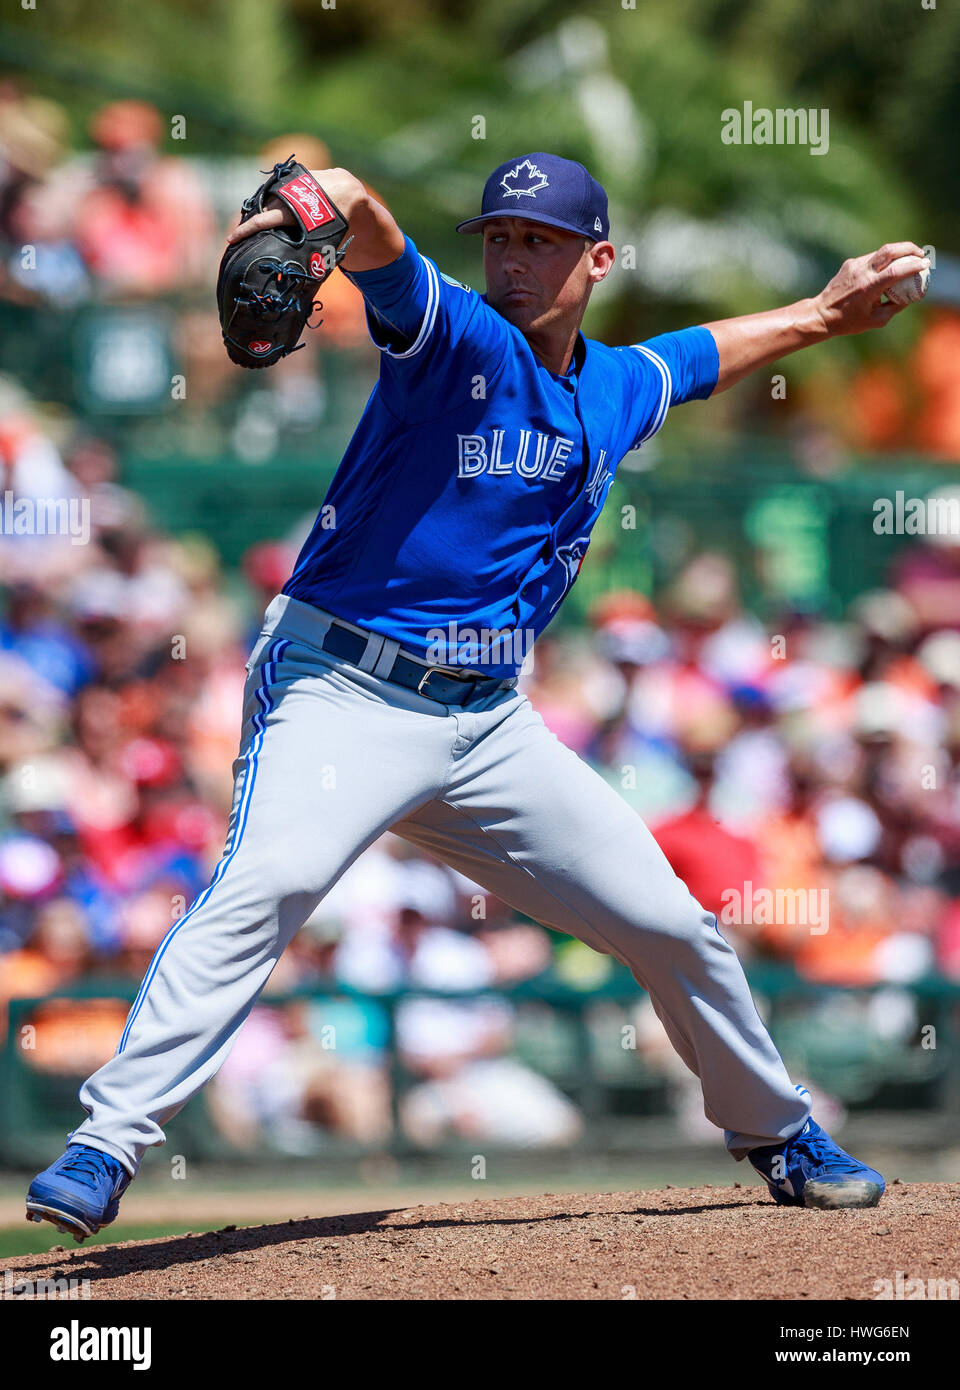 Ed Smith Stadium. 21st Mar, 2017. Florida, USA-Toronto Blue Jays relief pitcher Jeff Beliveau (36) relieves Baltimore Orioles starting pitcher Logan Verrett (41) in the 4th inning in a spring training game at Ed Smith Stadium. Del Mecum/CSM/Alamy Live News Stock Photo